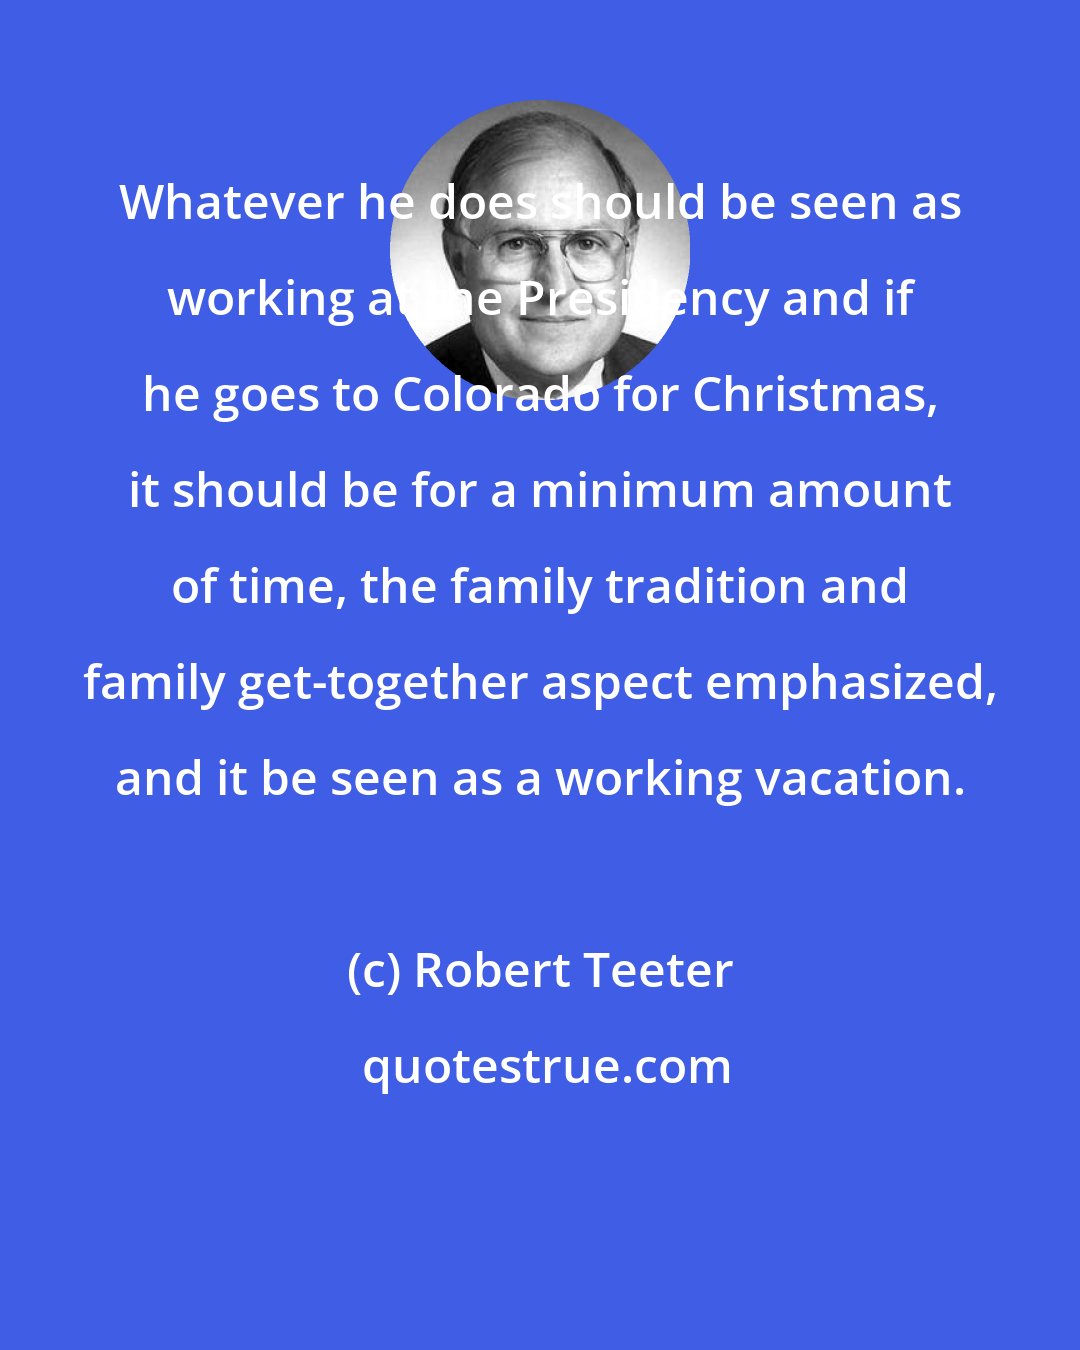 Robert Teeter: Whatever he does should be seen as working at the Presidency and if he goes to Colorado for Christmas, it should be for a minimum amount of time, the family tradition and family get-together aspect emphasized, and it be seen as a working vacation.